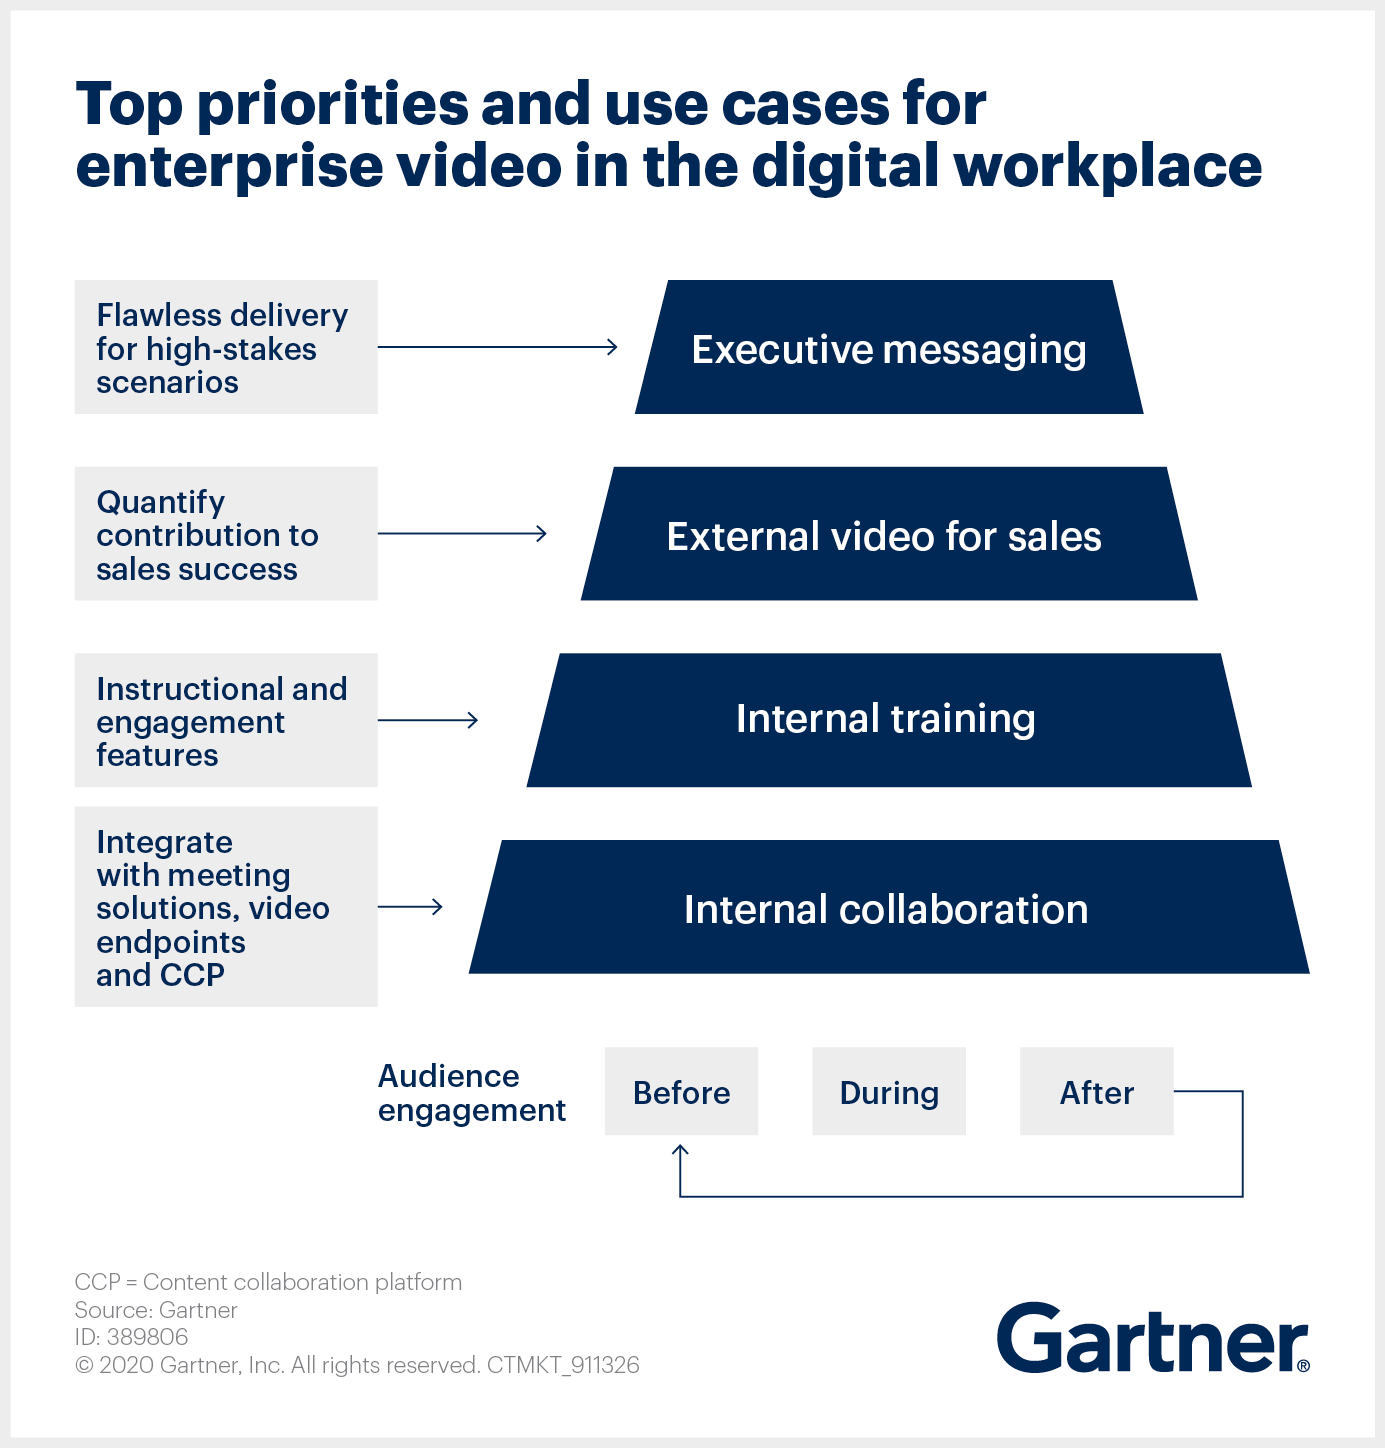 Gartner Top Priorities and Use Cases for Enterprise Video in the Digital Workplace.png